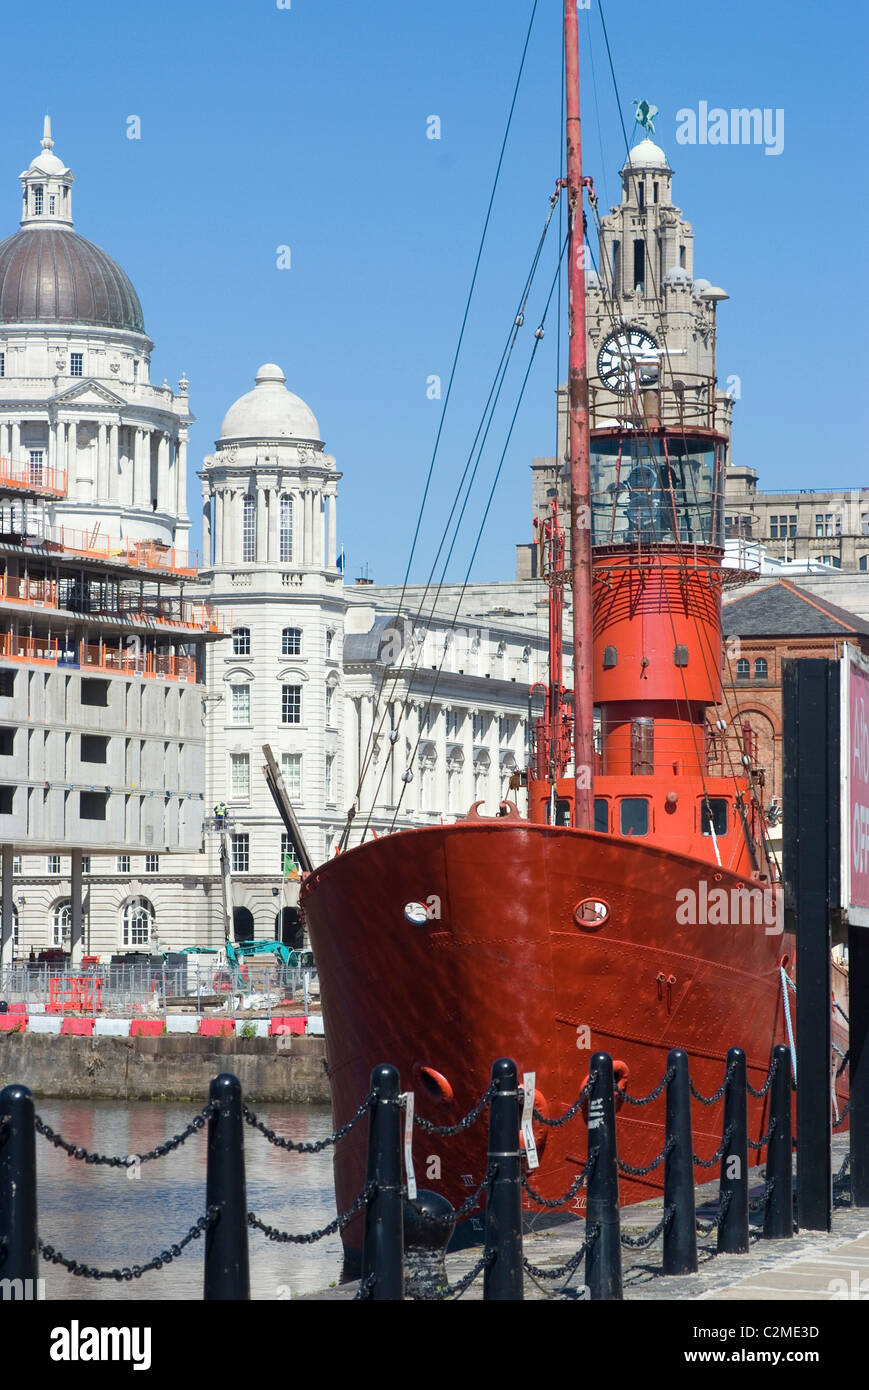 Lightship near the renovated Albert Docks with a view towards the The Liver and the Port of Liverpool Buildings, Liverpool, Stock Photo